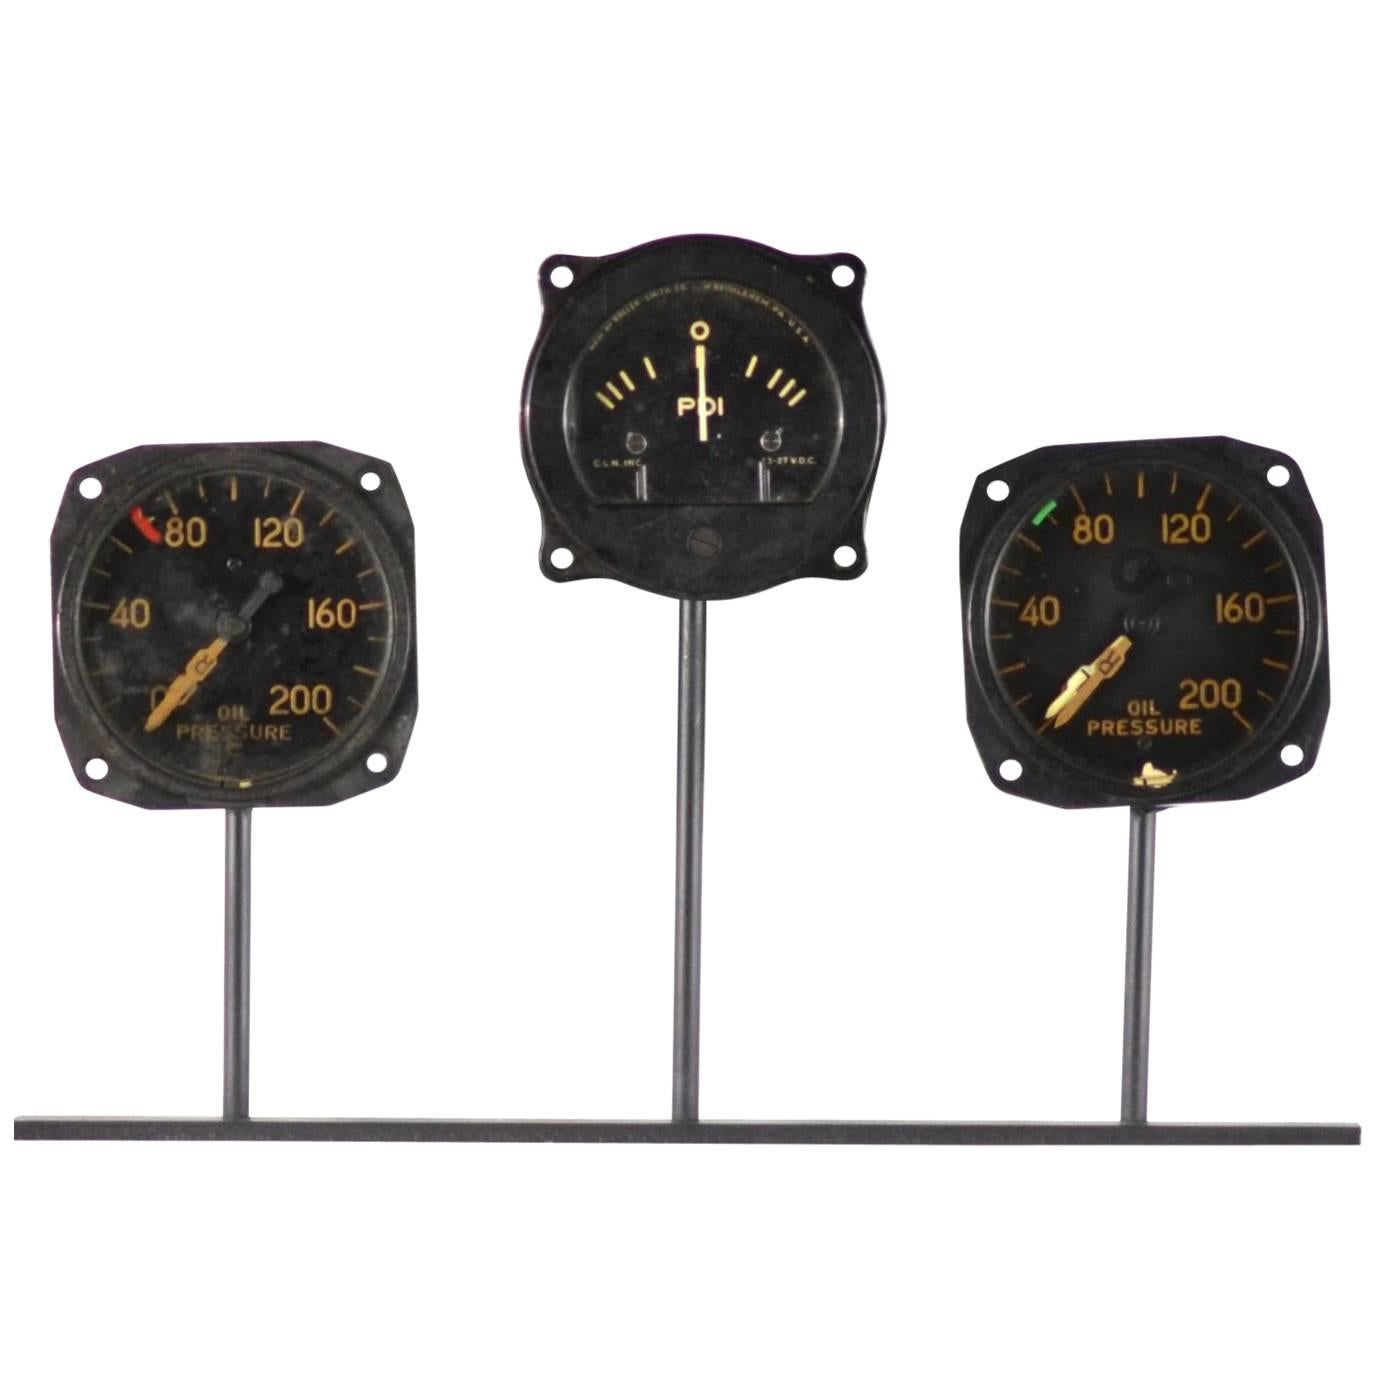 Rare Vintage Set of Gauges from Wwii B-17 and B-24 Planes